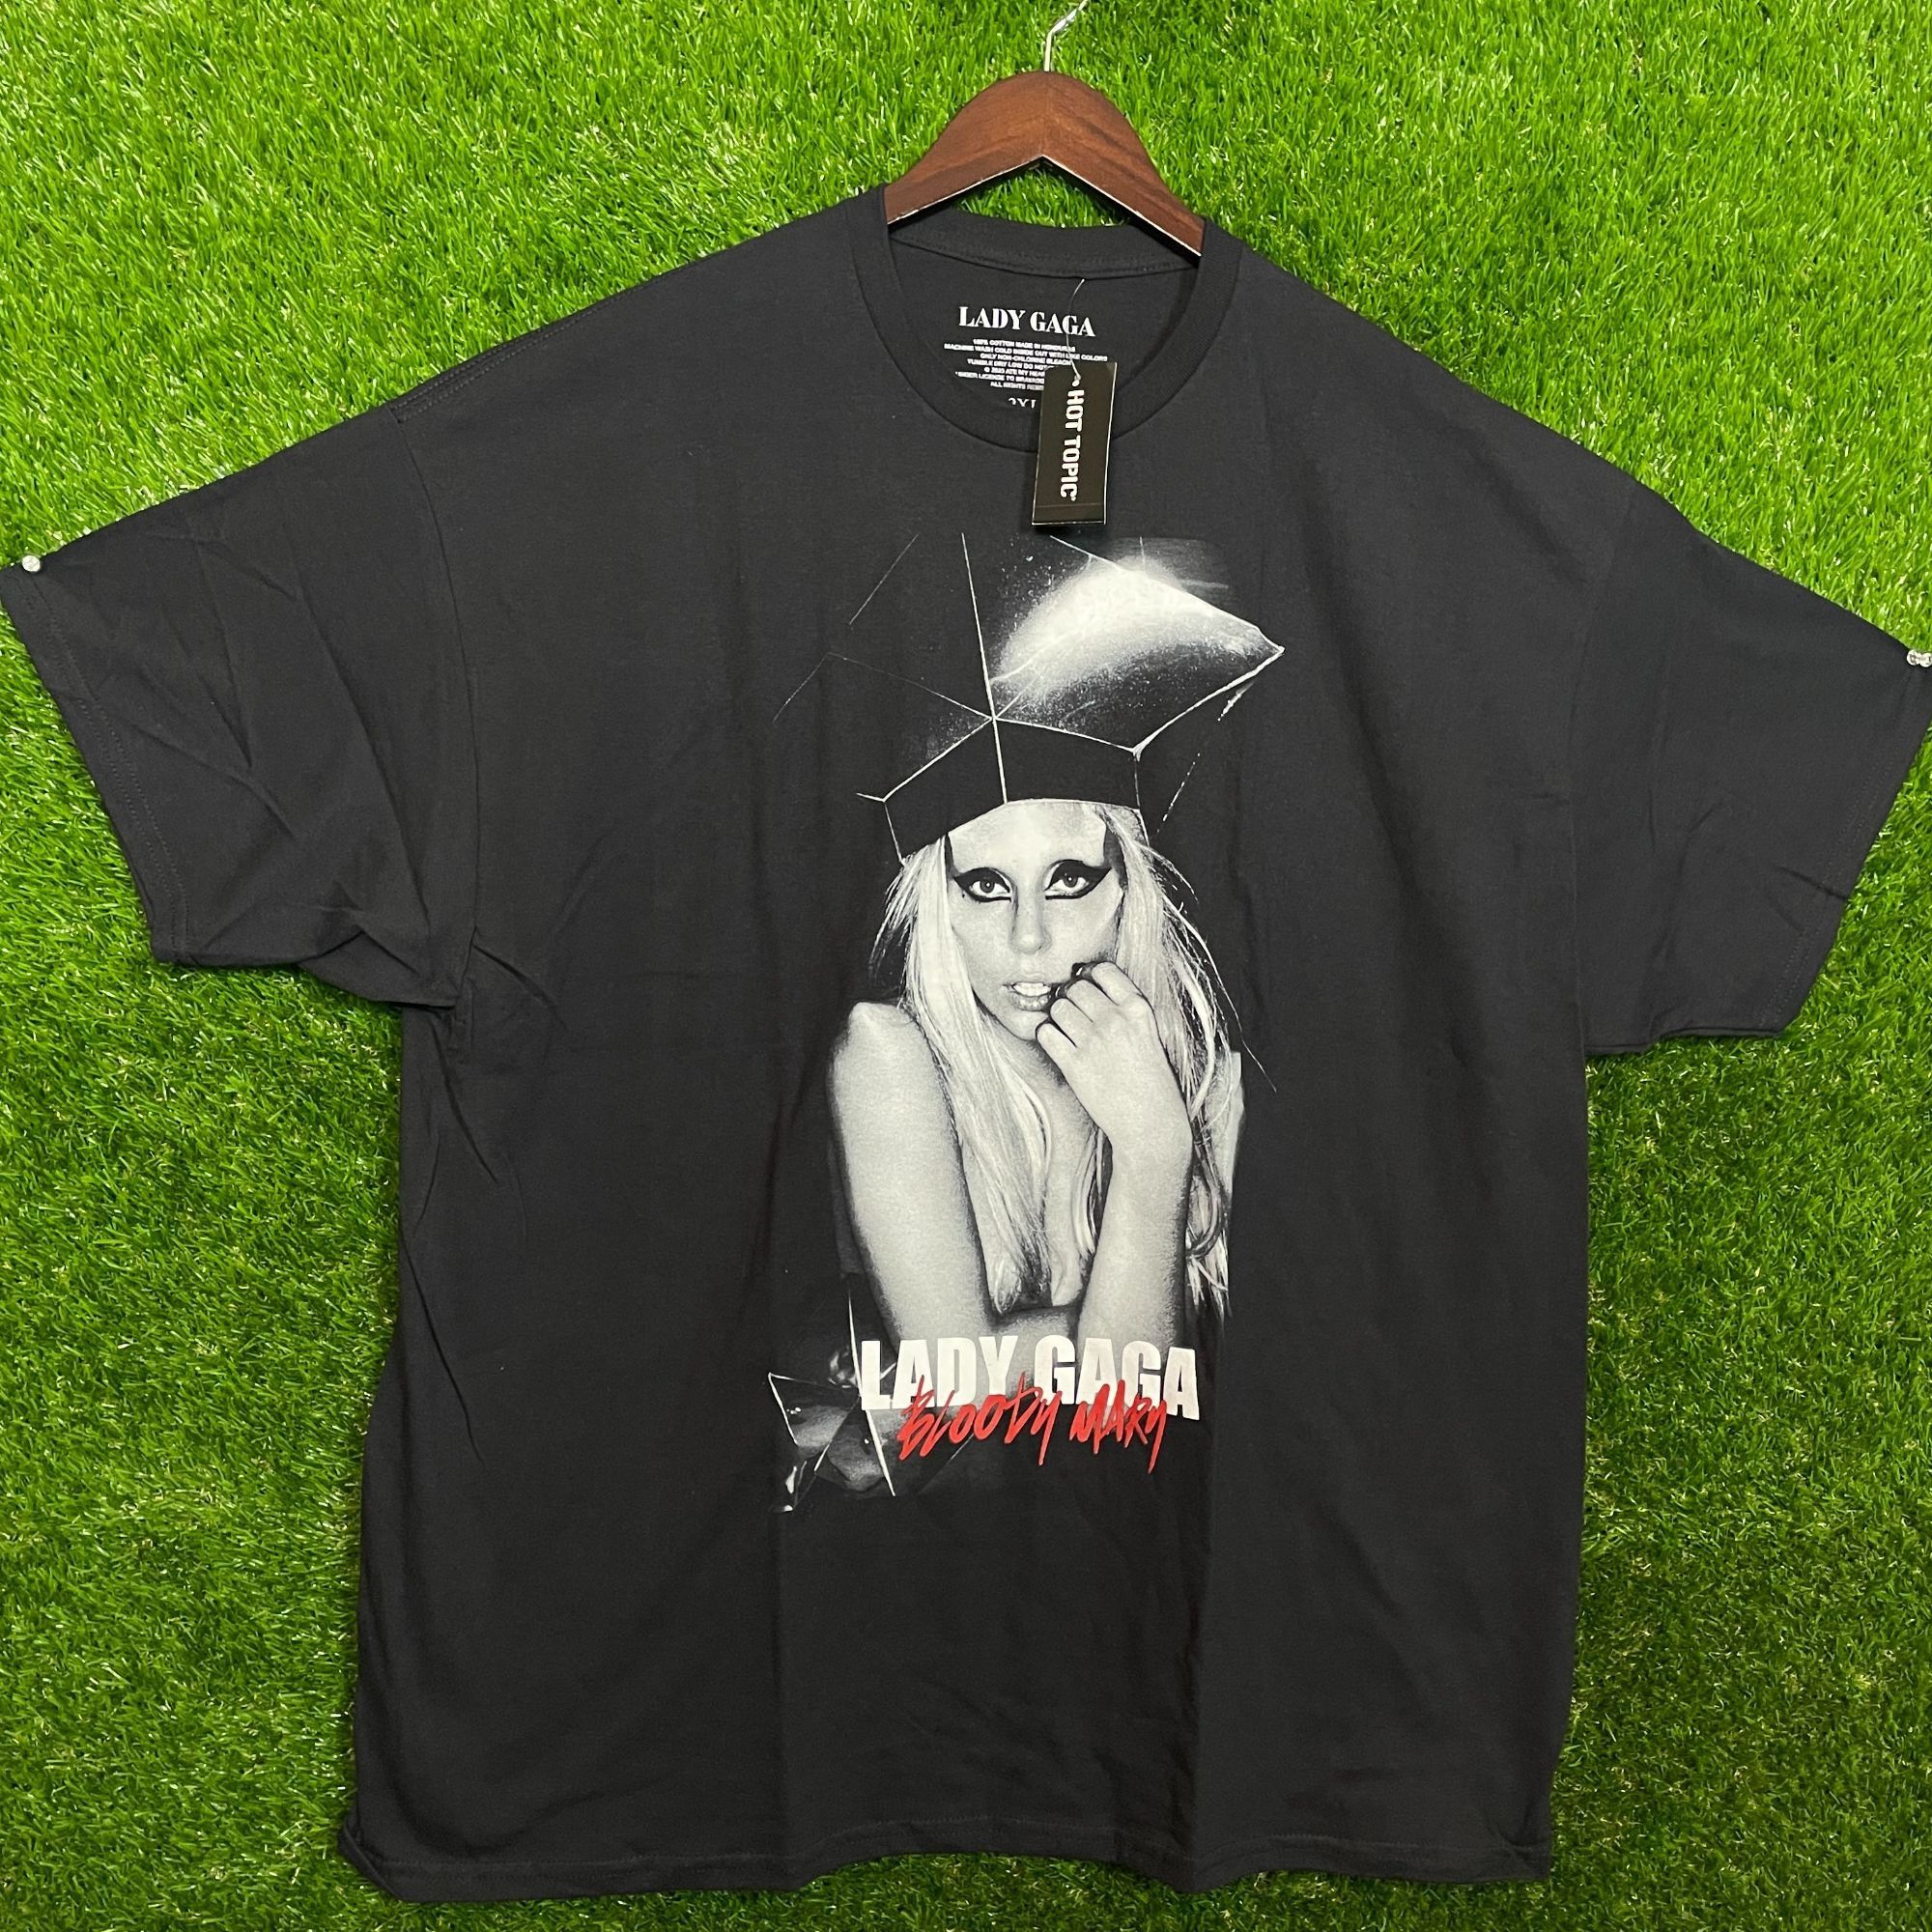 Vintage Lady Gaga bloody Mary T-shirt size 2X | Grailed